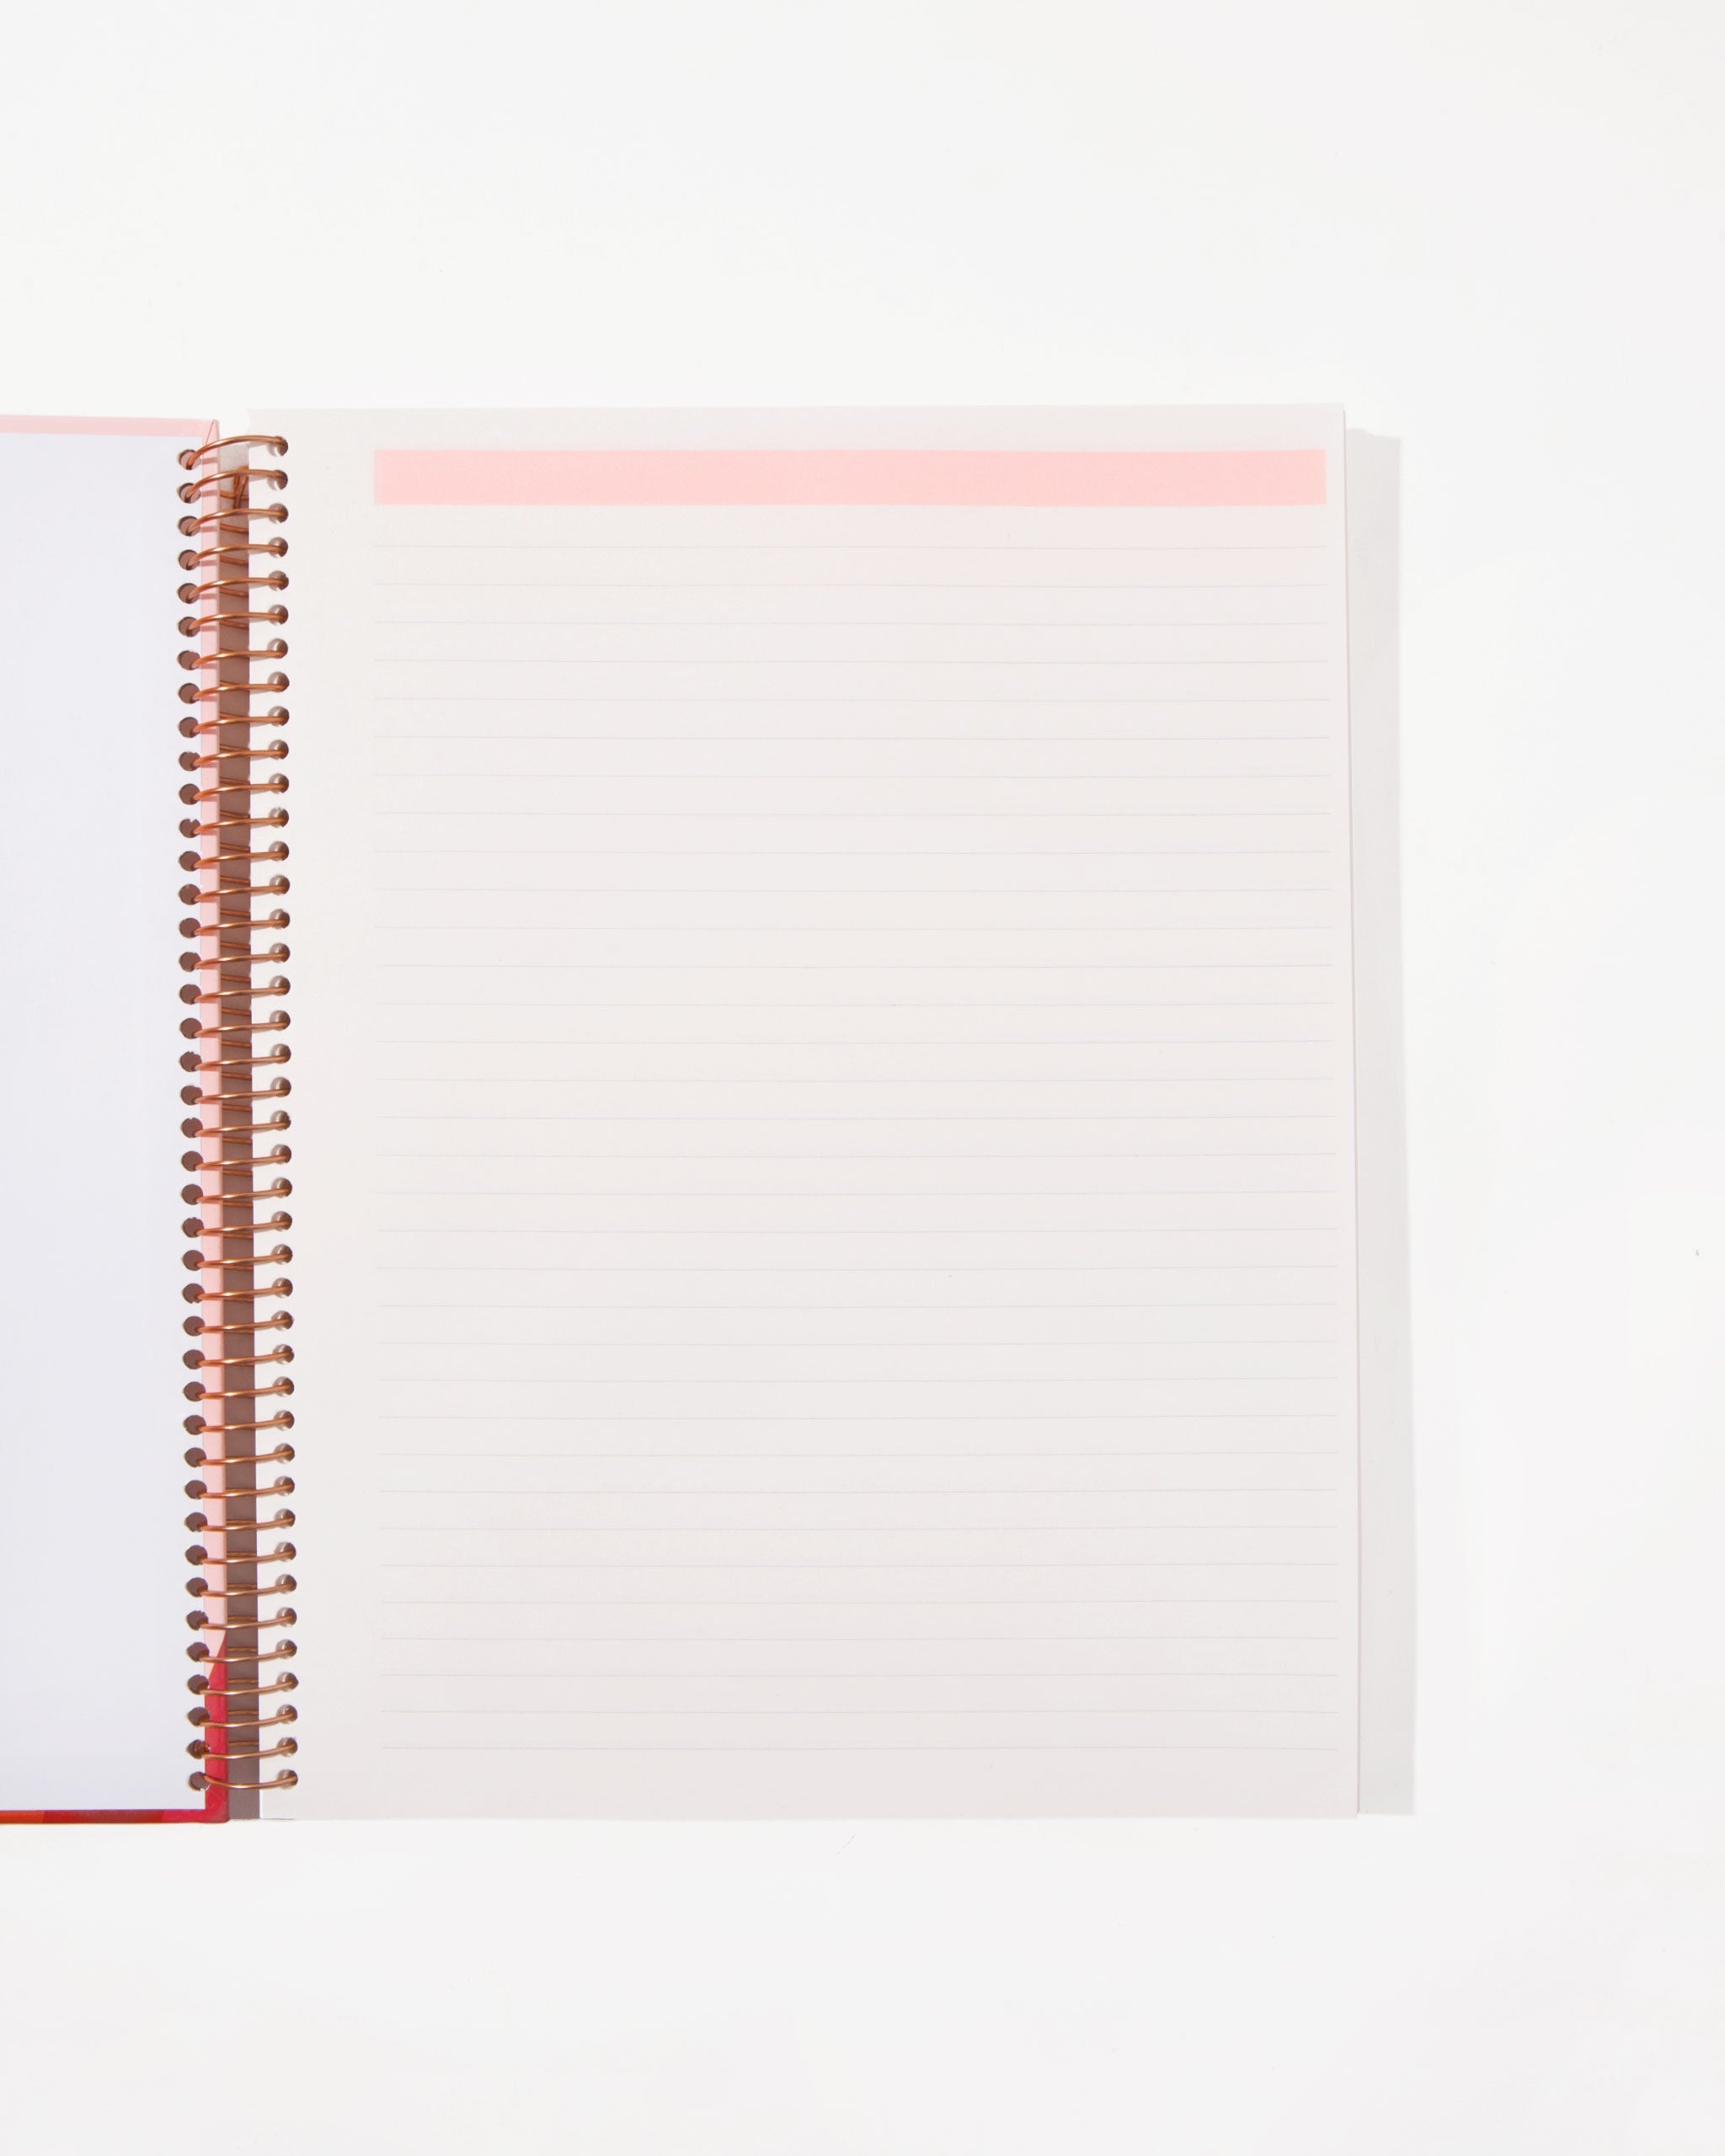 Stationery - Spiral Notebook - Give Me Space